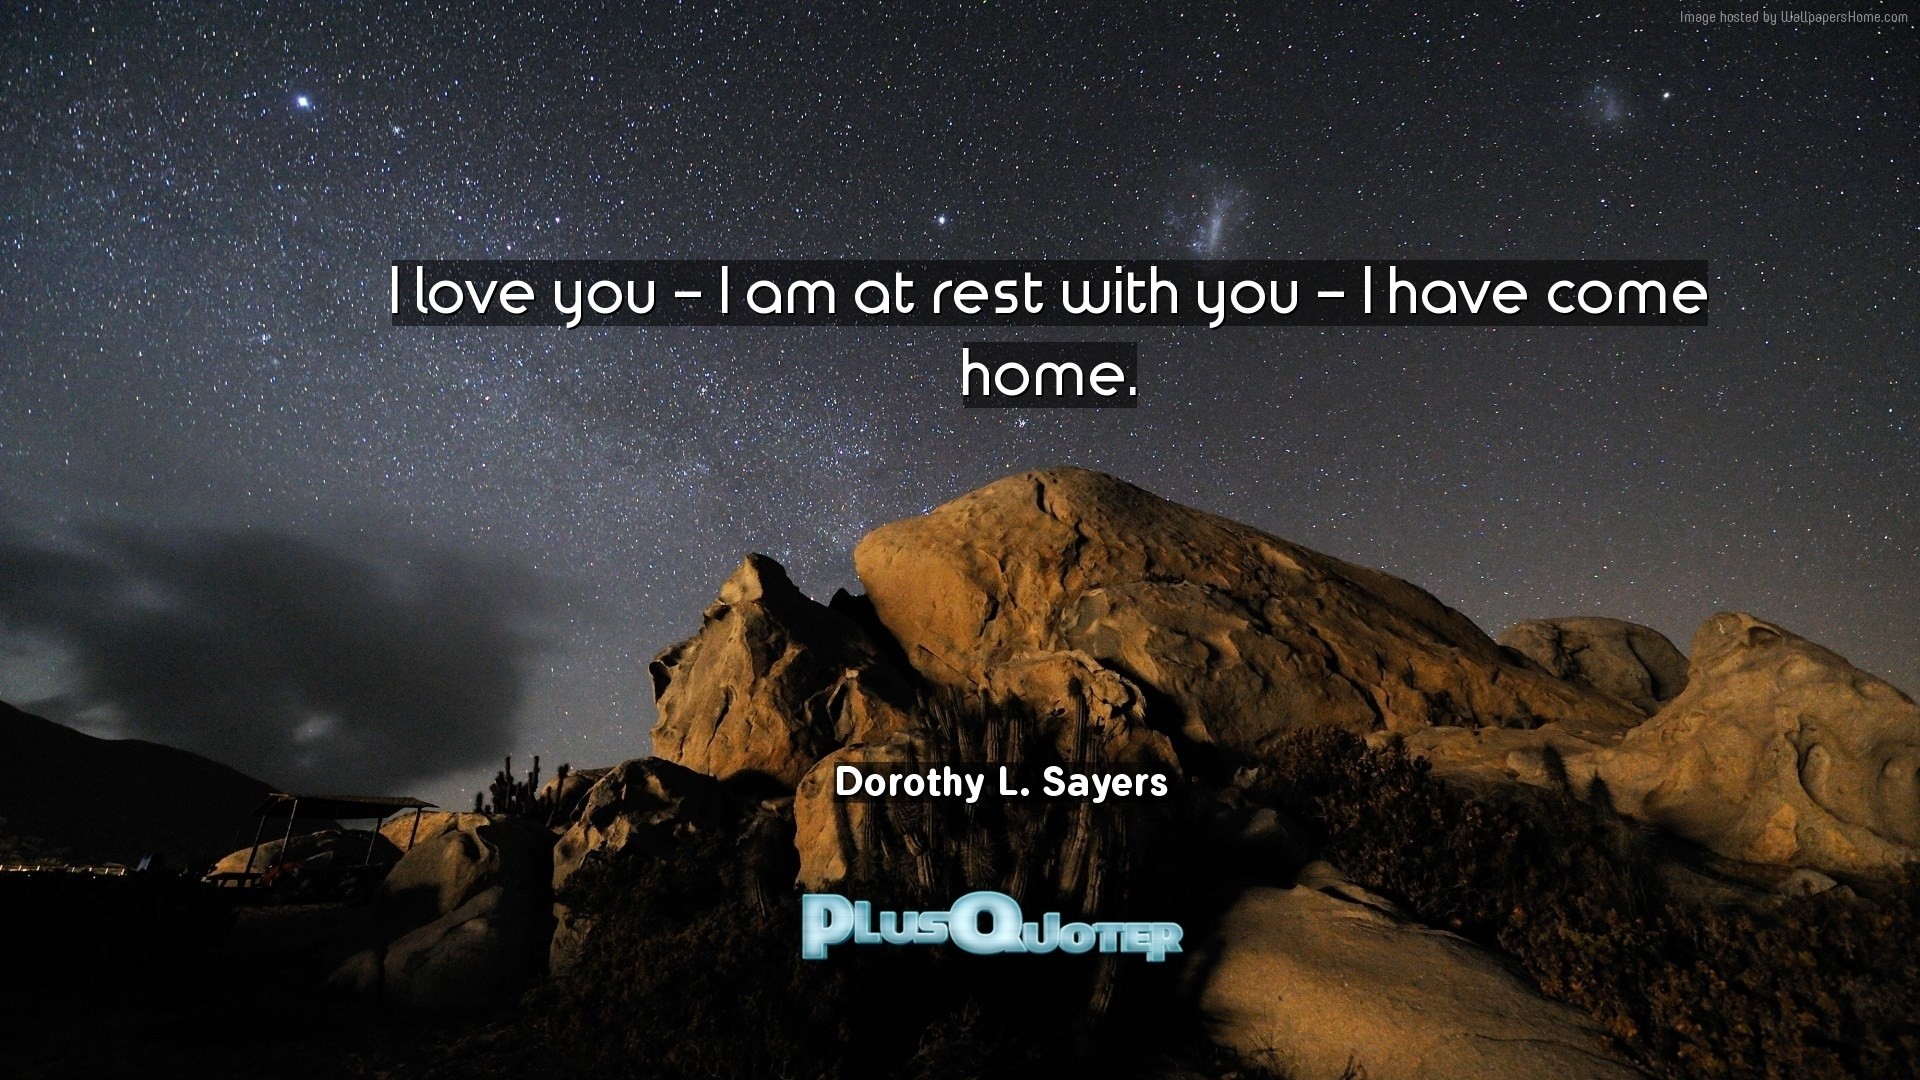 1920x1080 Download Wallpaper with inspirational Quotes- "I love you - I am at rest  with